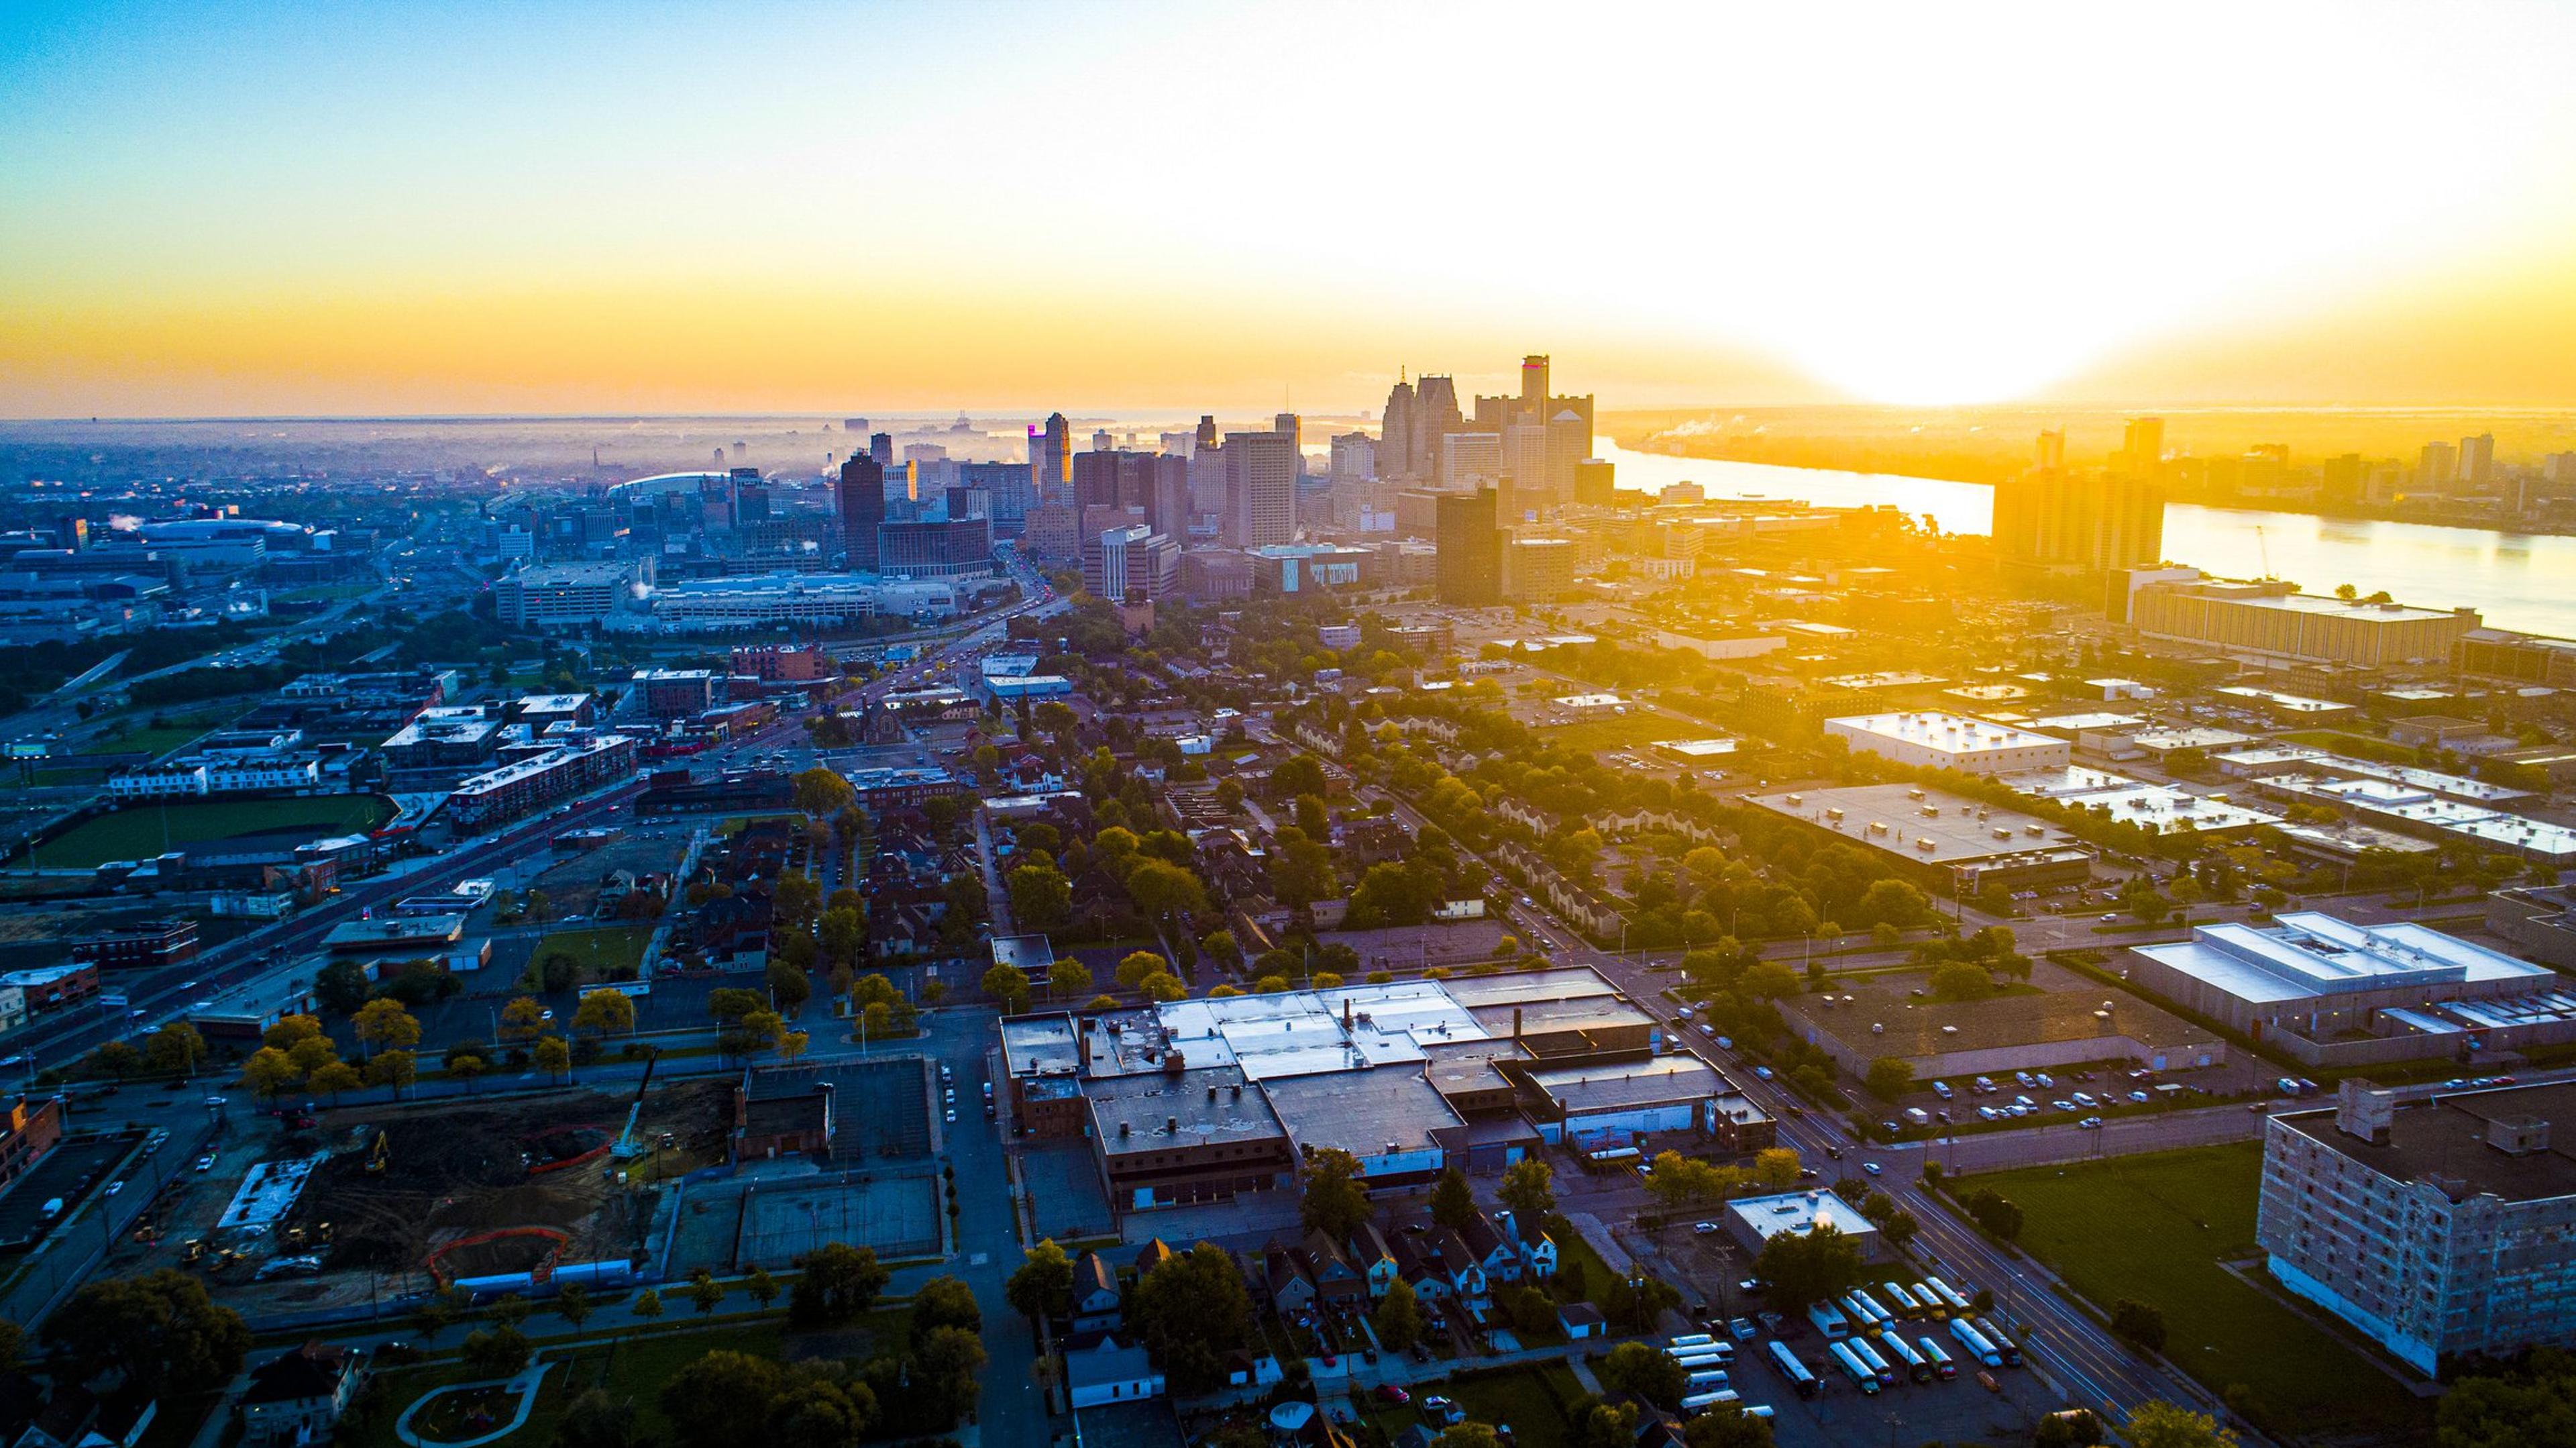 The Detroit skyline from a bird's eye view at sunrise.